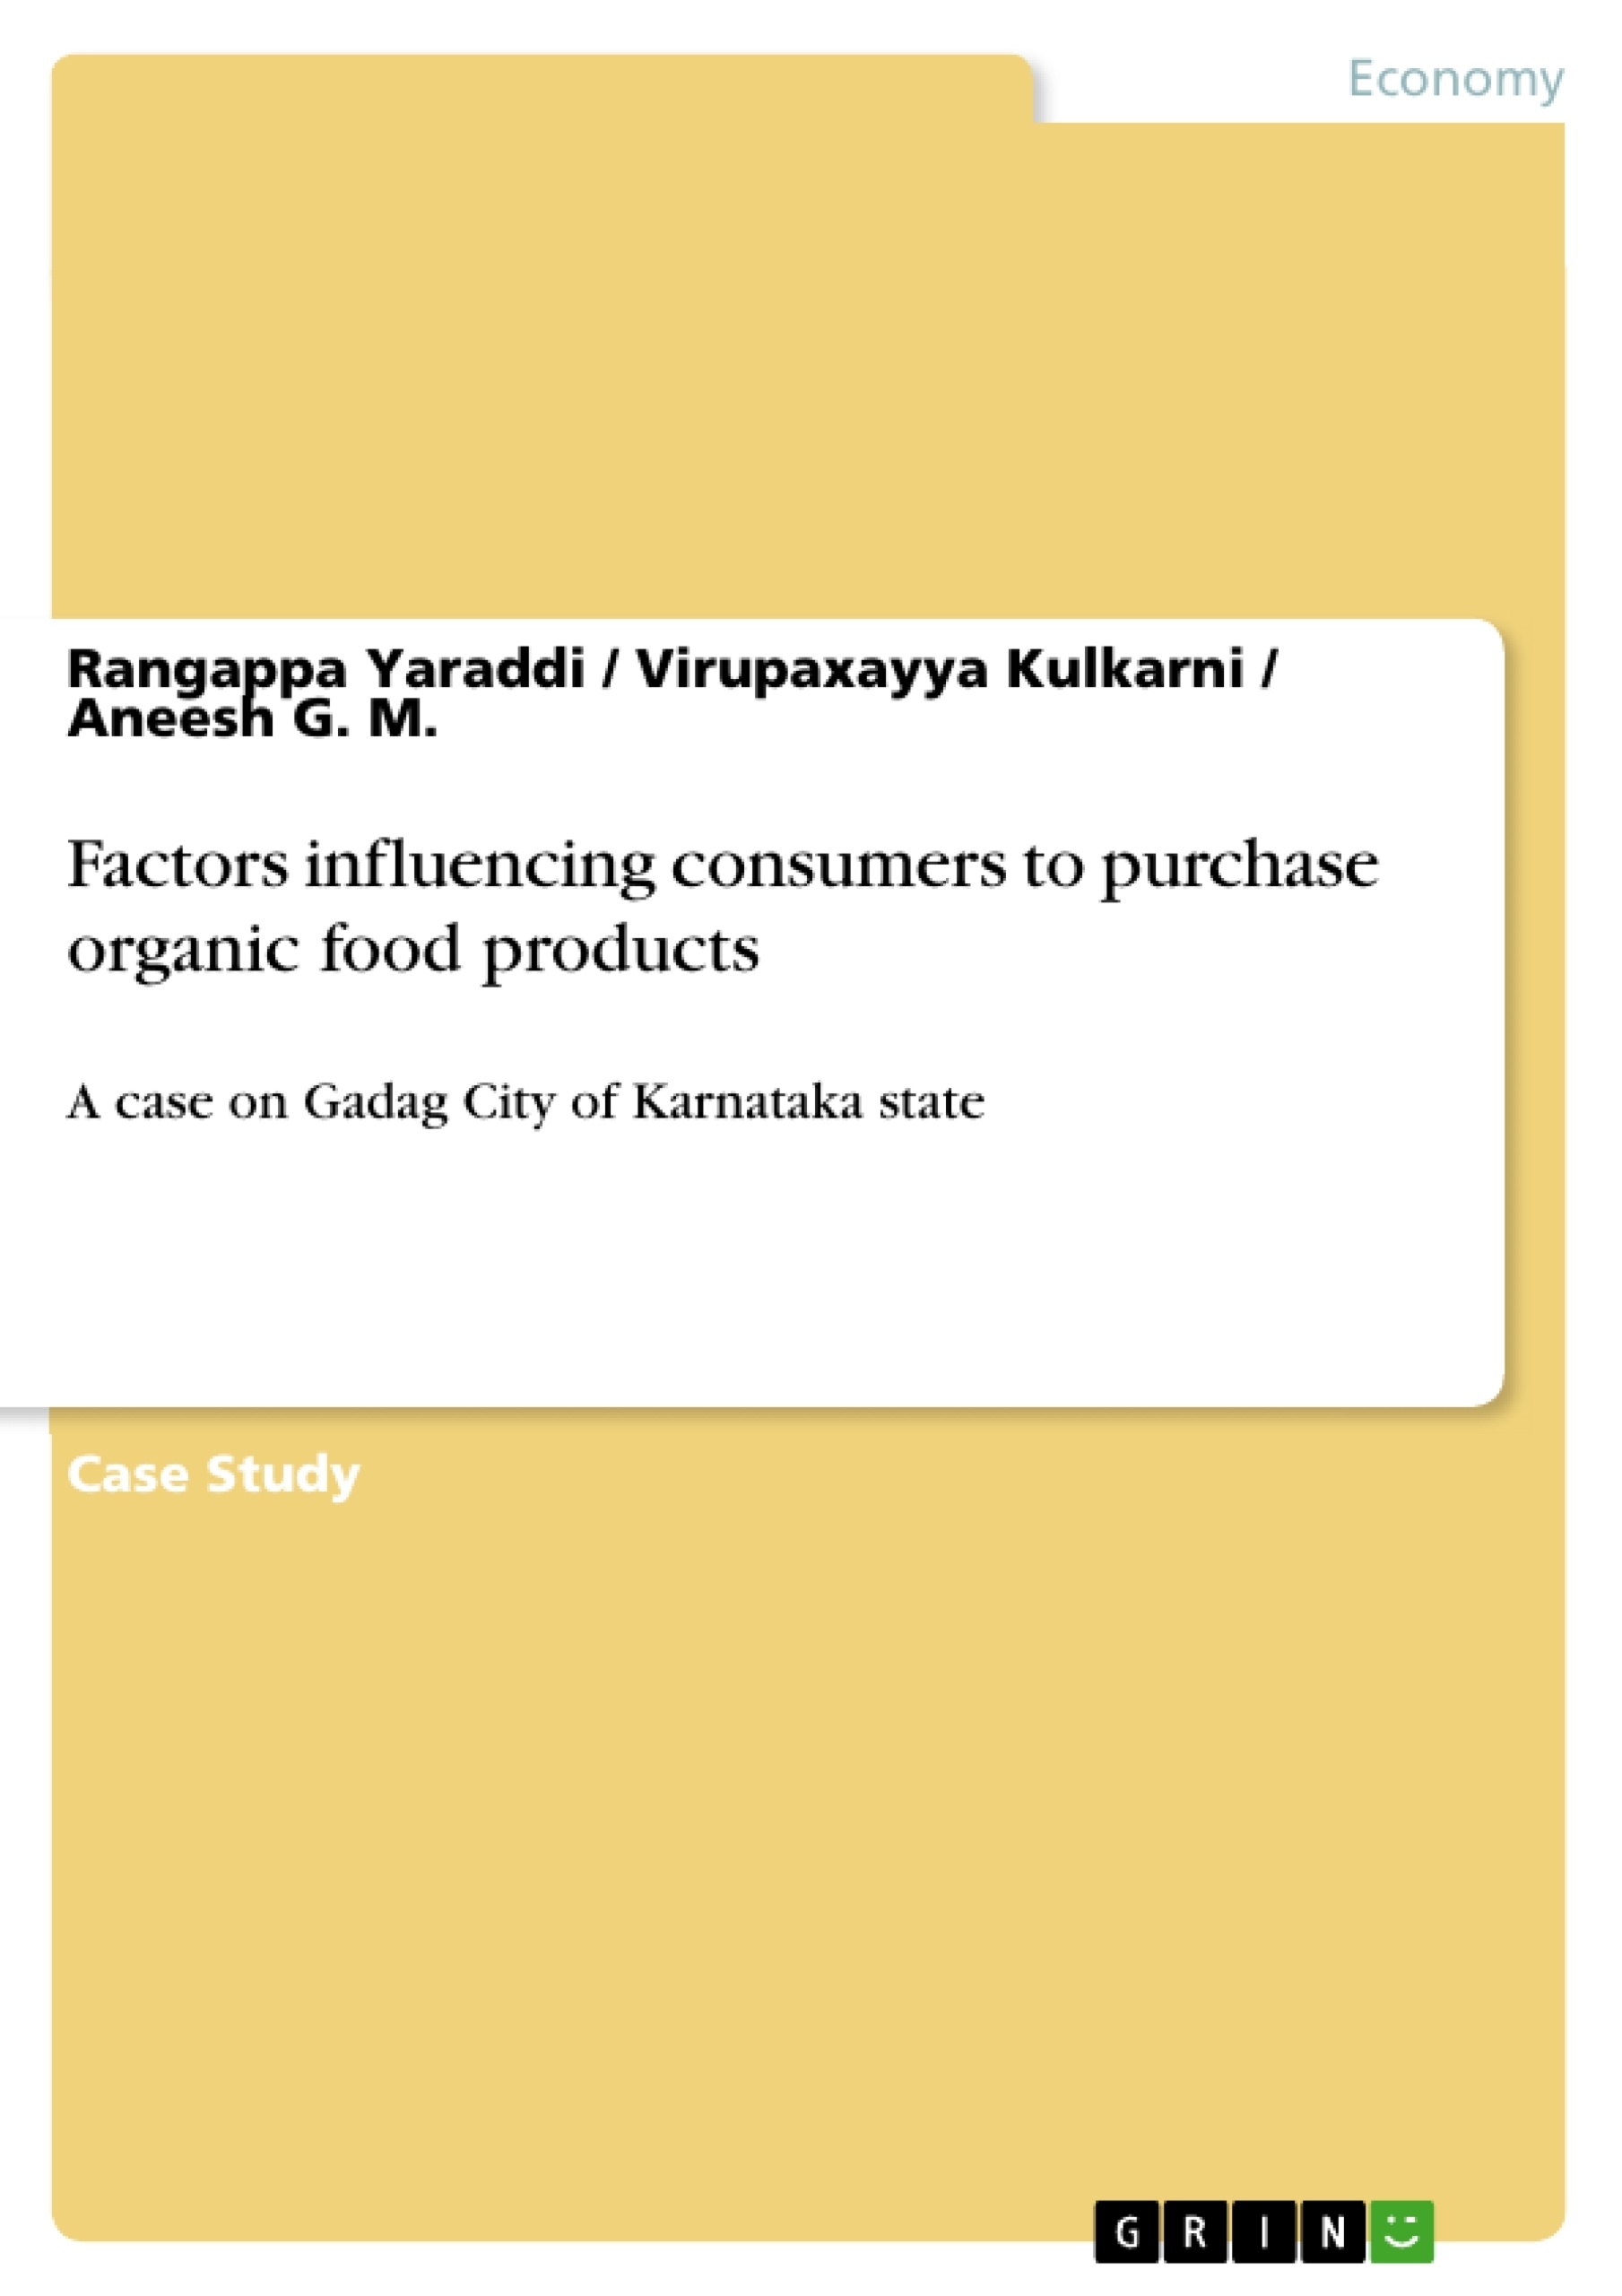 Title: Factors influencing consumers to purchase organic food products